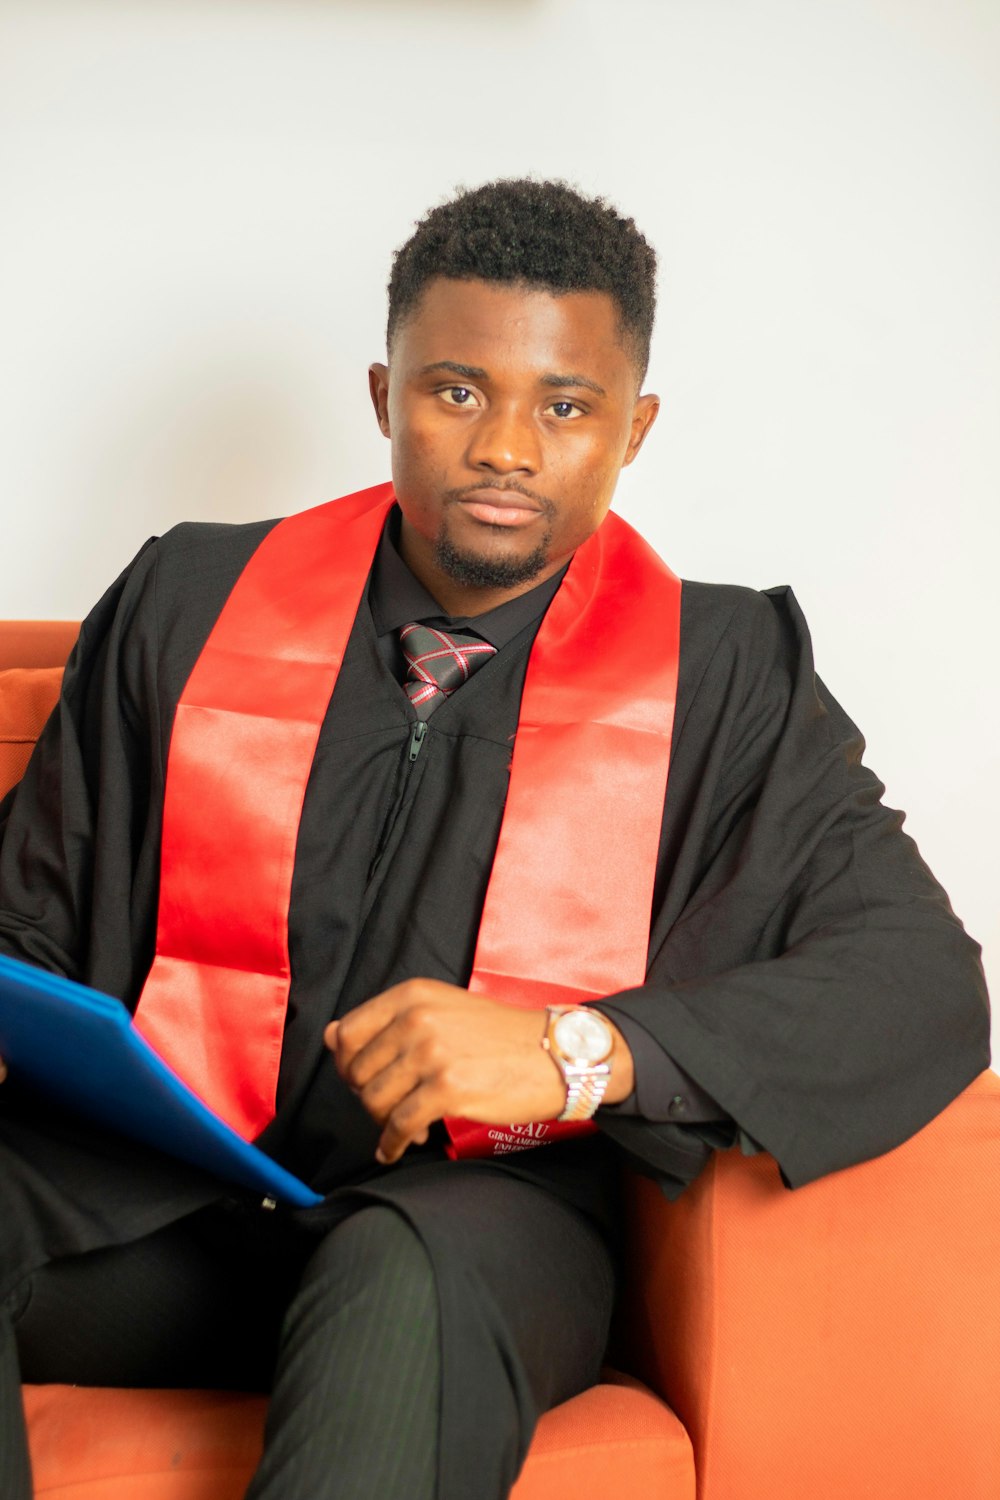 a man in a graduation gown sitting on a couch